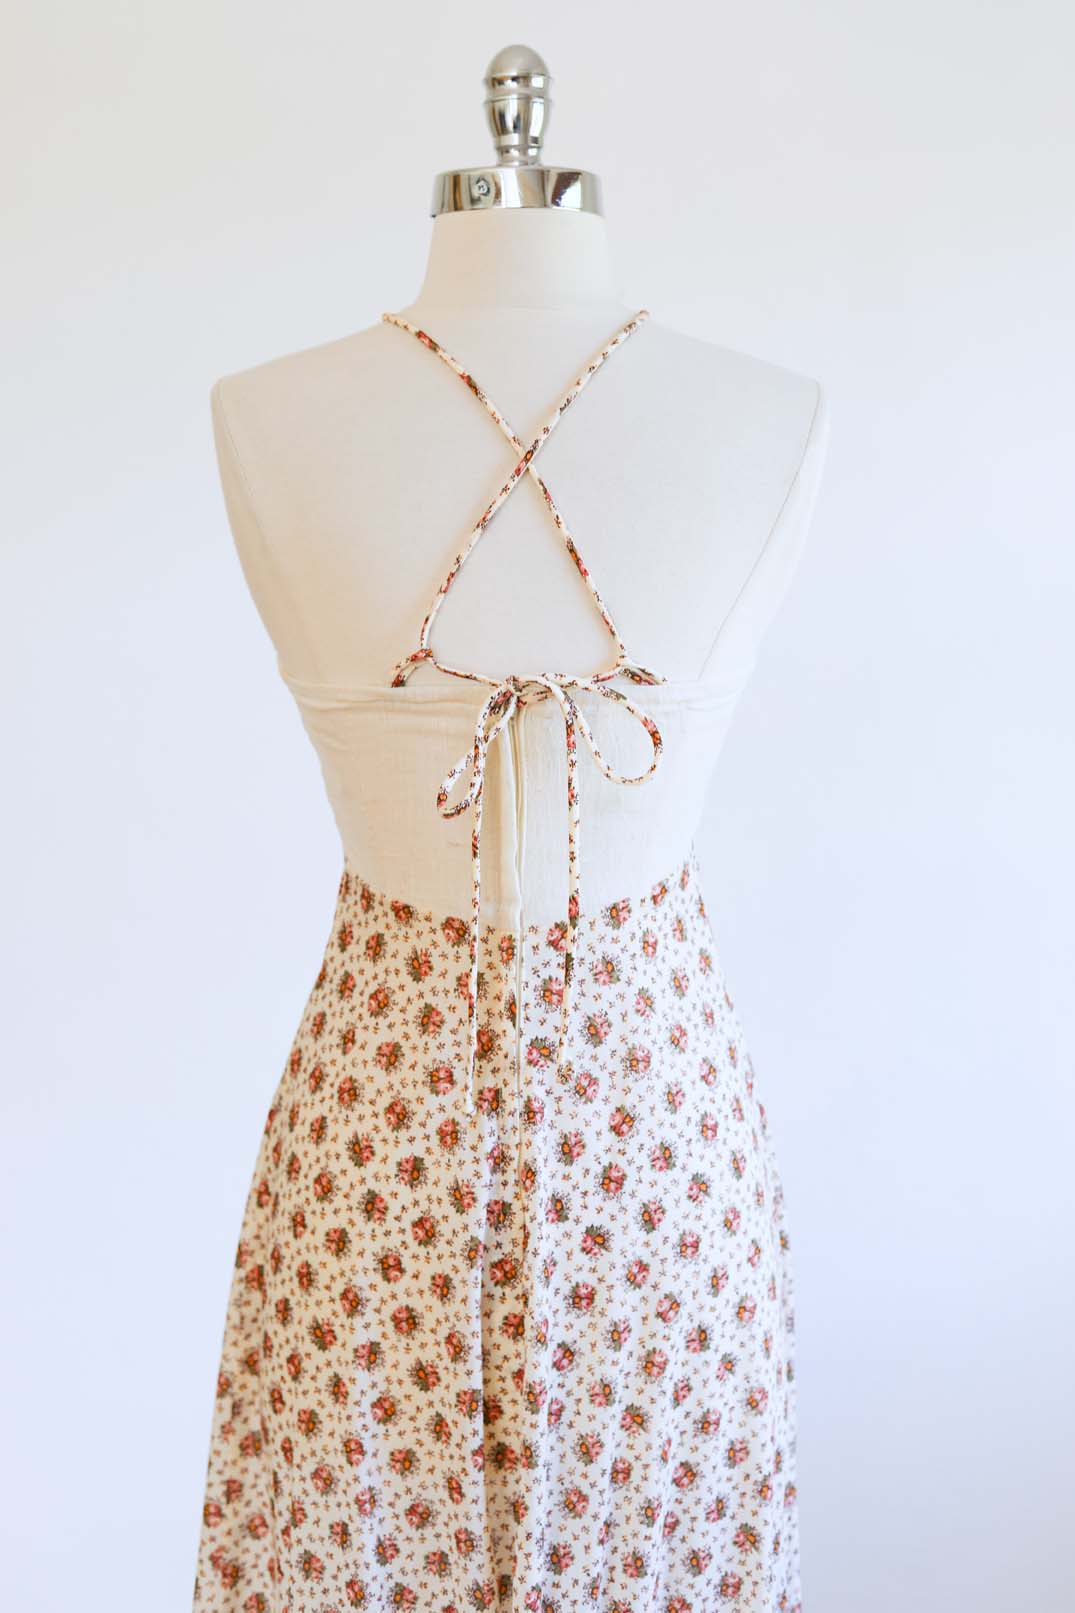 Vintage 1970s Dress - DARLING Jody T Cream Olive Pink Mustard Rose Print Calico Prairie Maxi Sundress w Convertible Straps Size XS to M